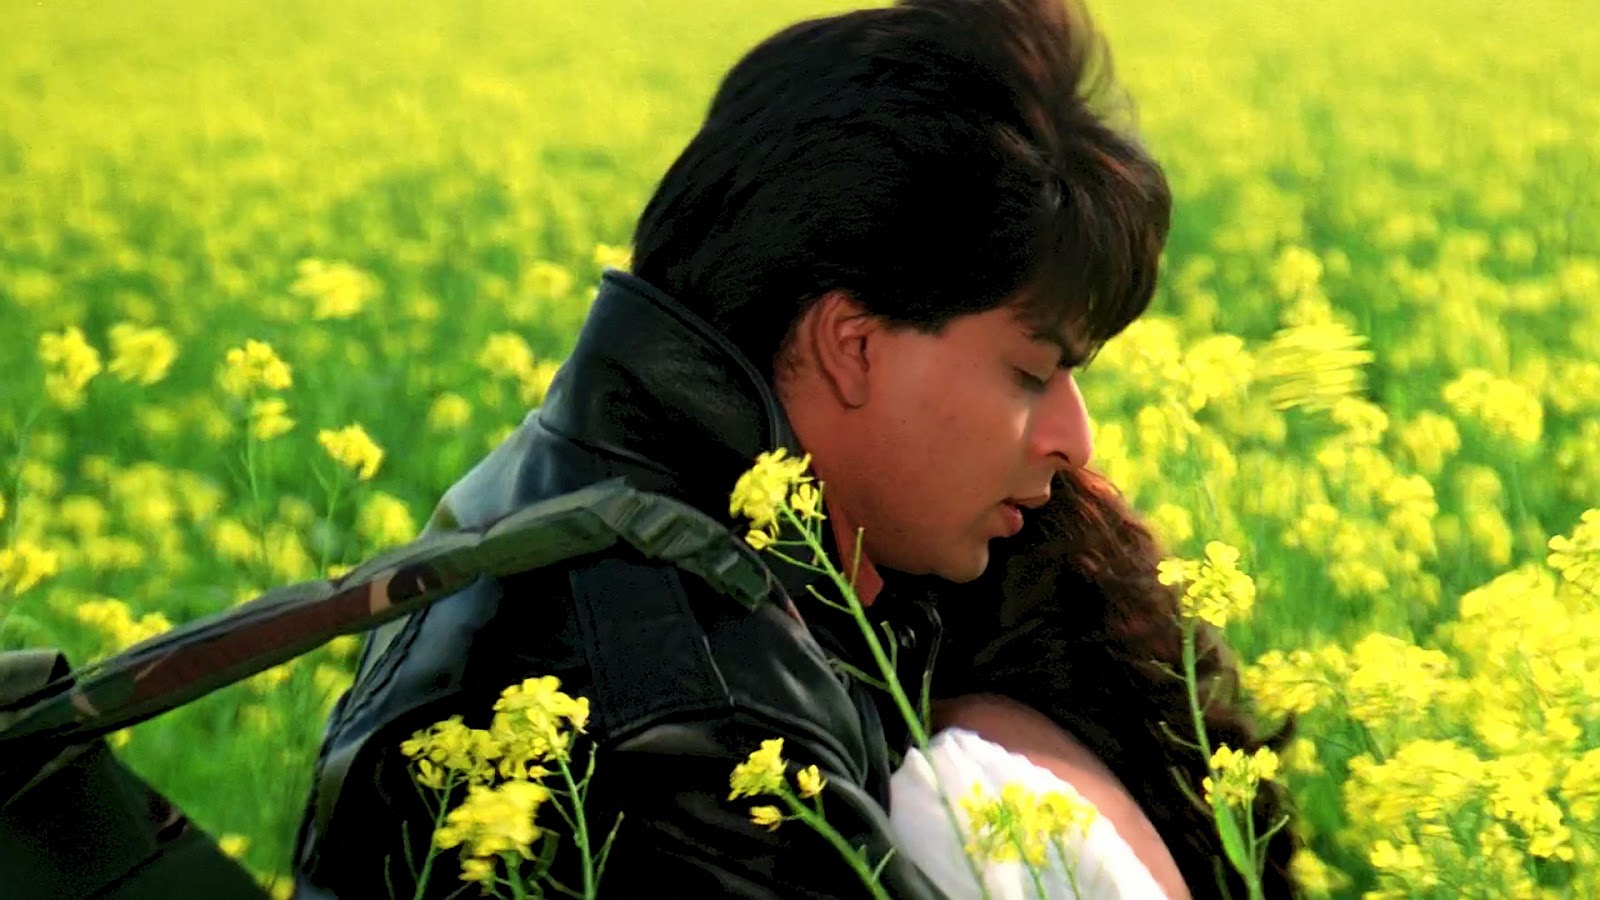 dilwale dulhania le jayenge mp4 hd movie download